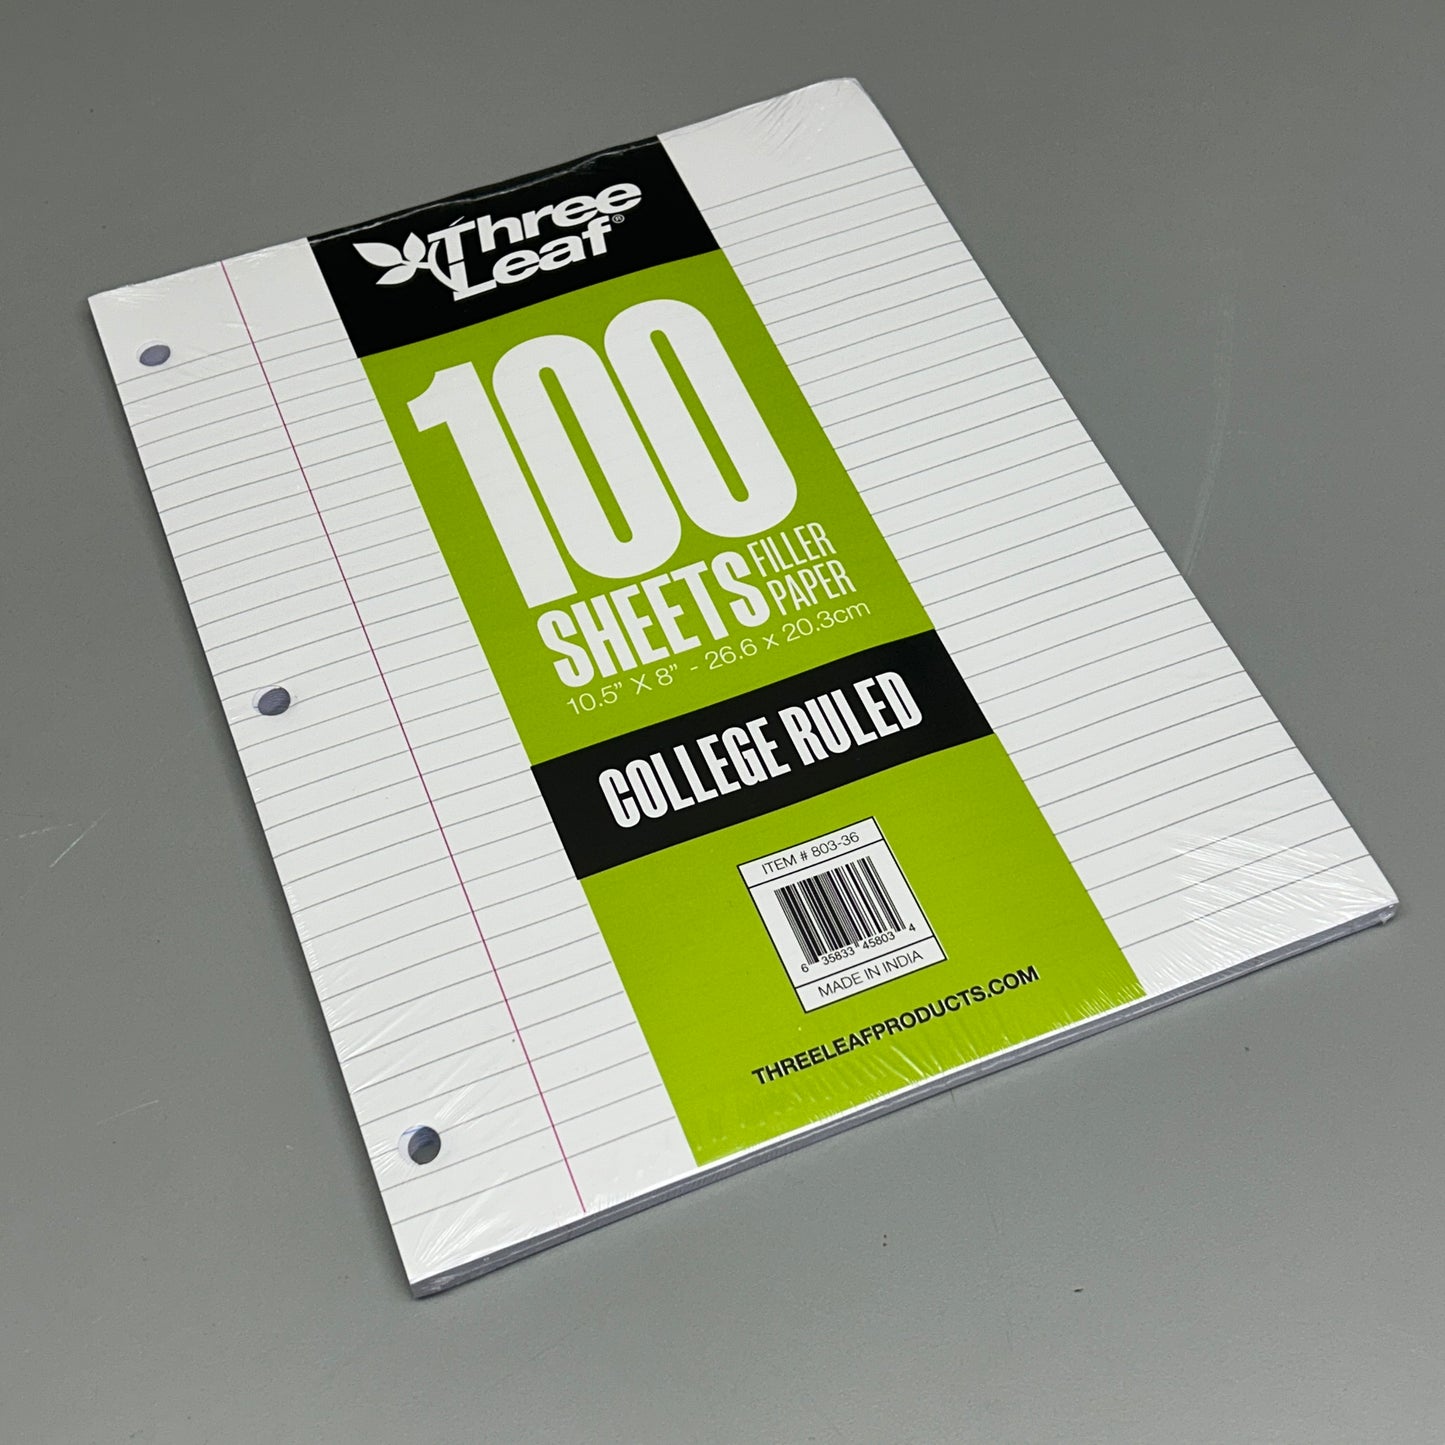 THREE LEAF (36 PACK) Filler Paper College Ruled 100 Count 10.5" x 8" (New)